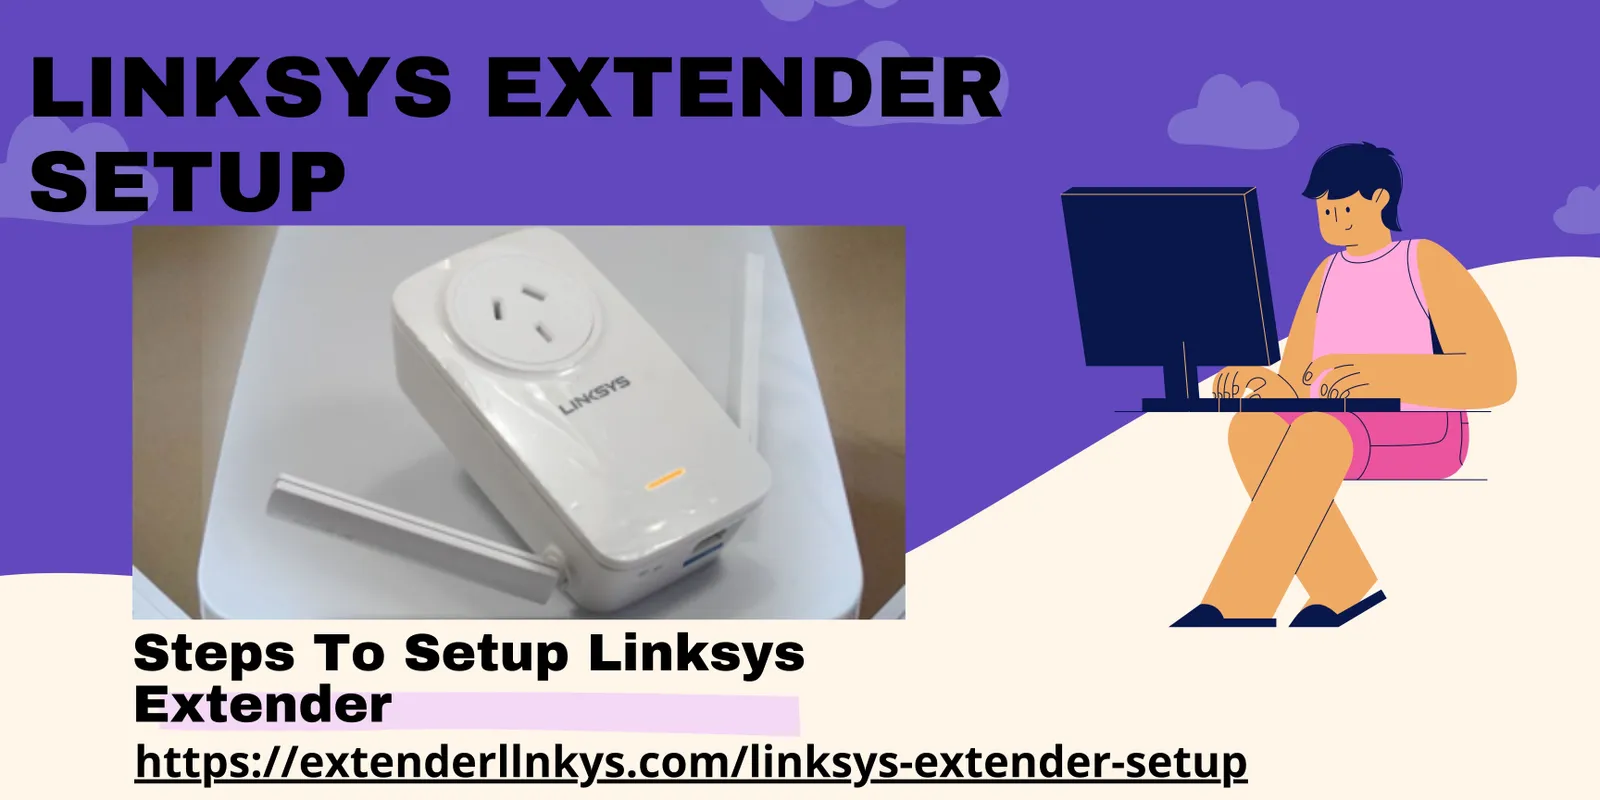 How To Setup Linksys Extender?